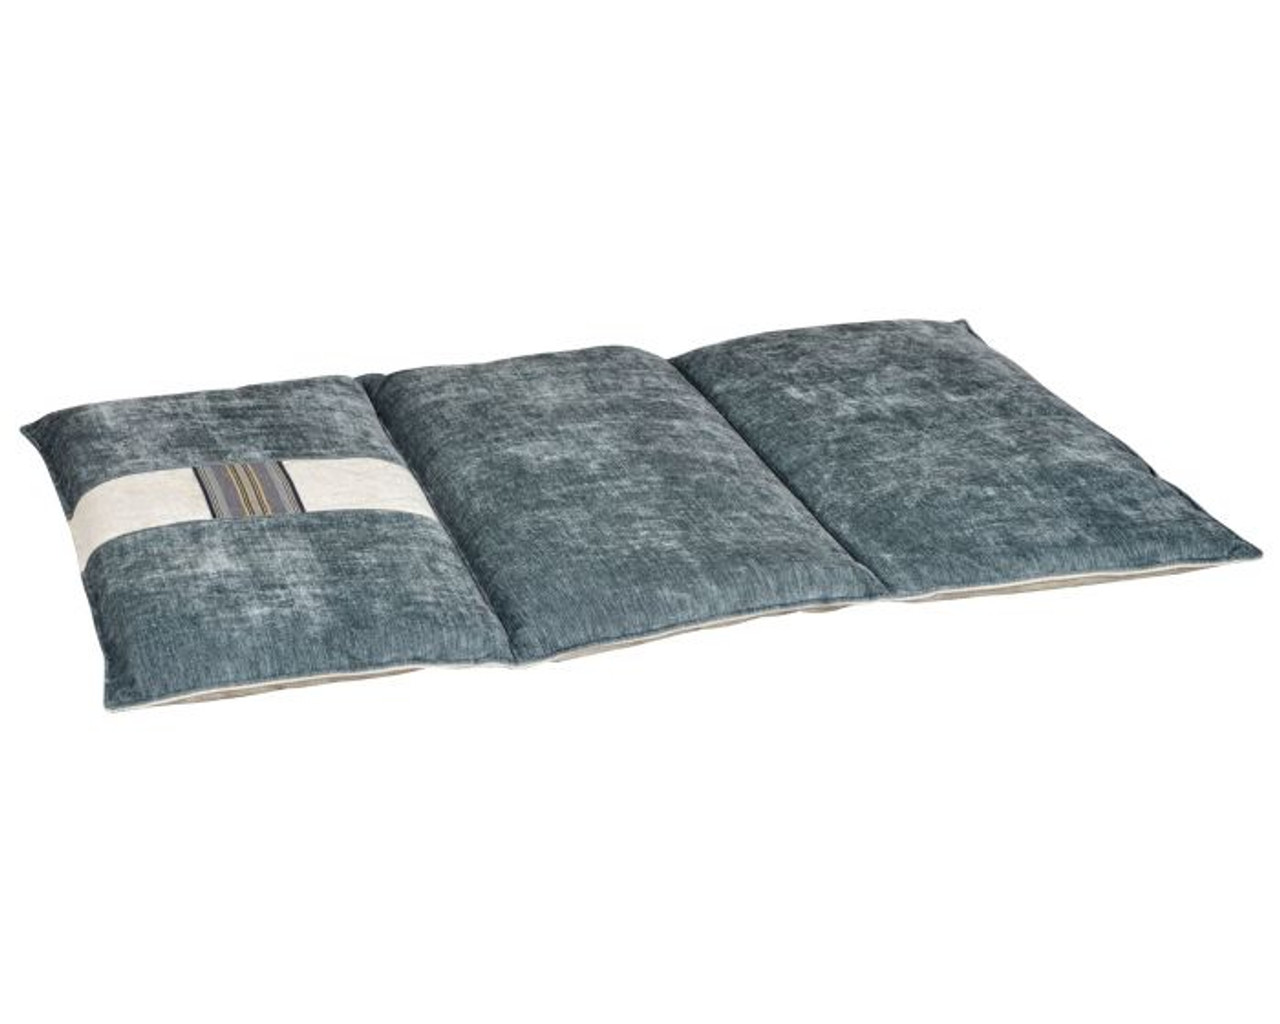 Bowsers Diamond Washed Microvelvet Urban Home & Travel Mat